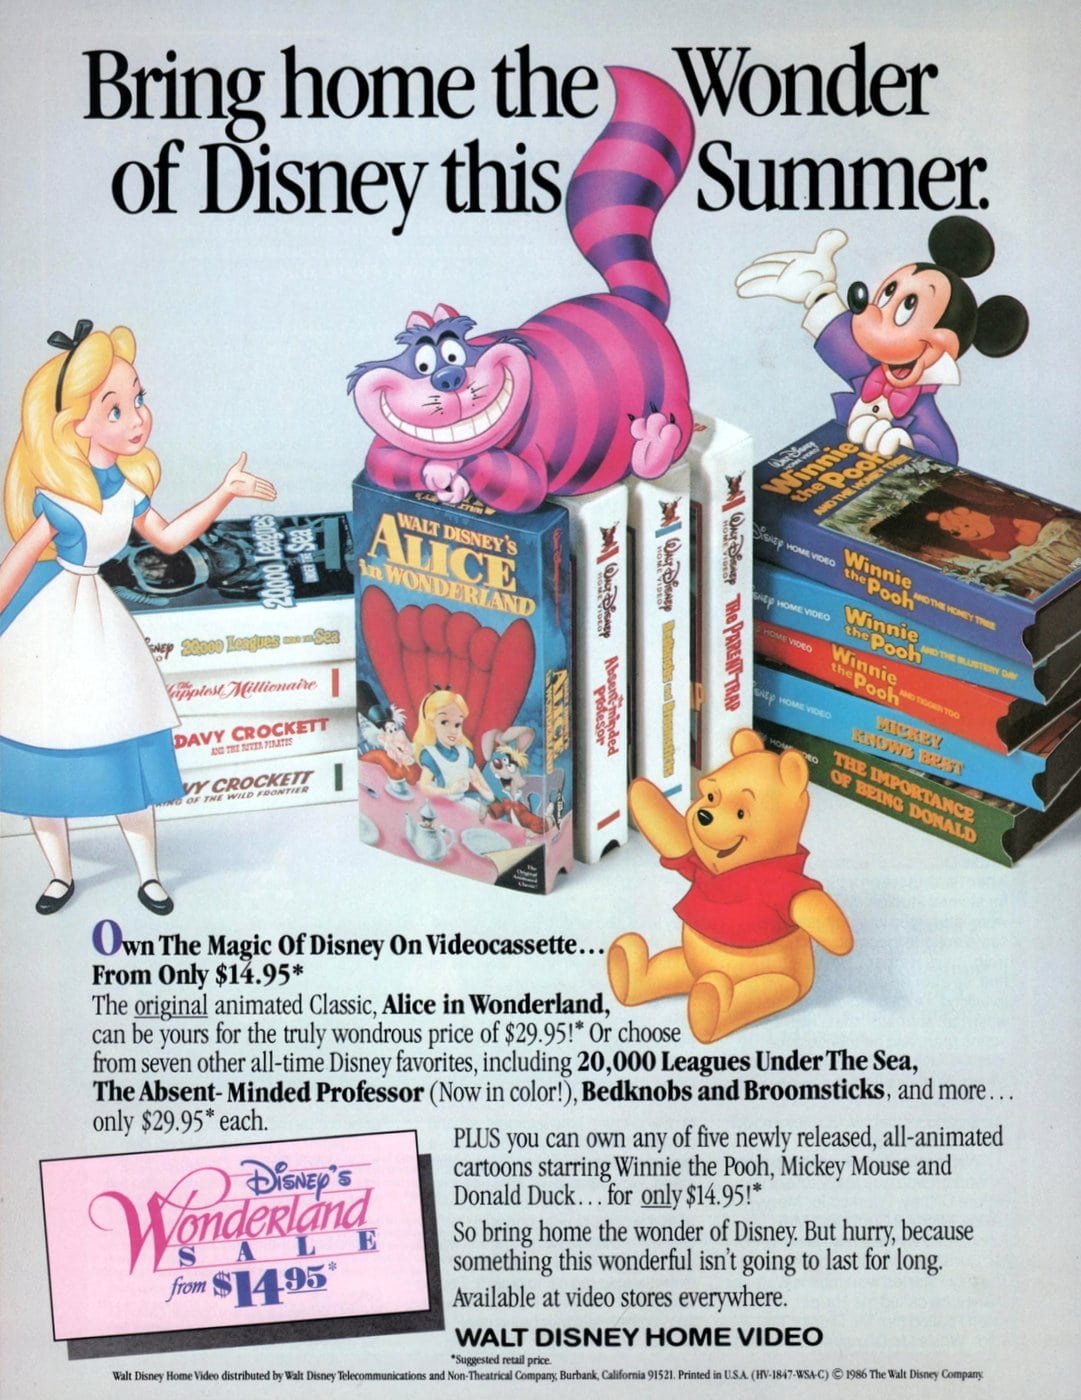 Home Video History On Twitter Here Is A Walt Disney Home Video